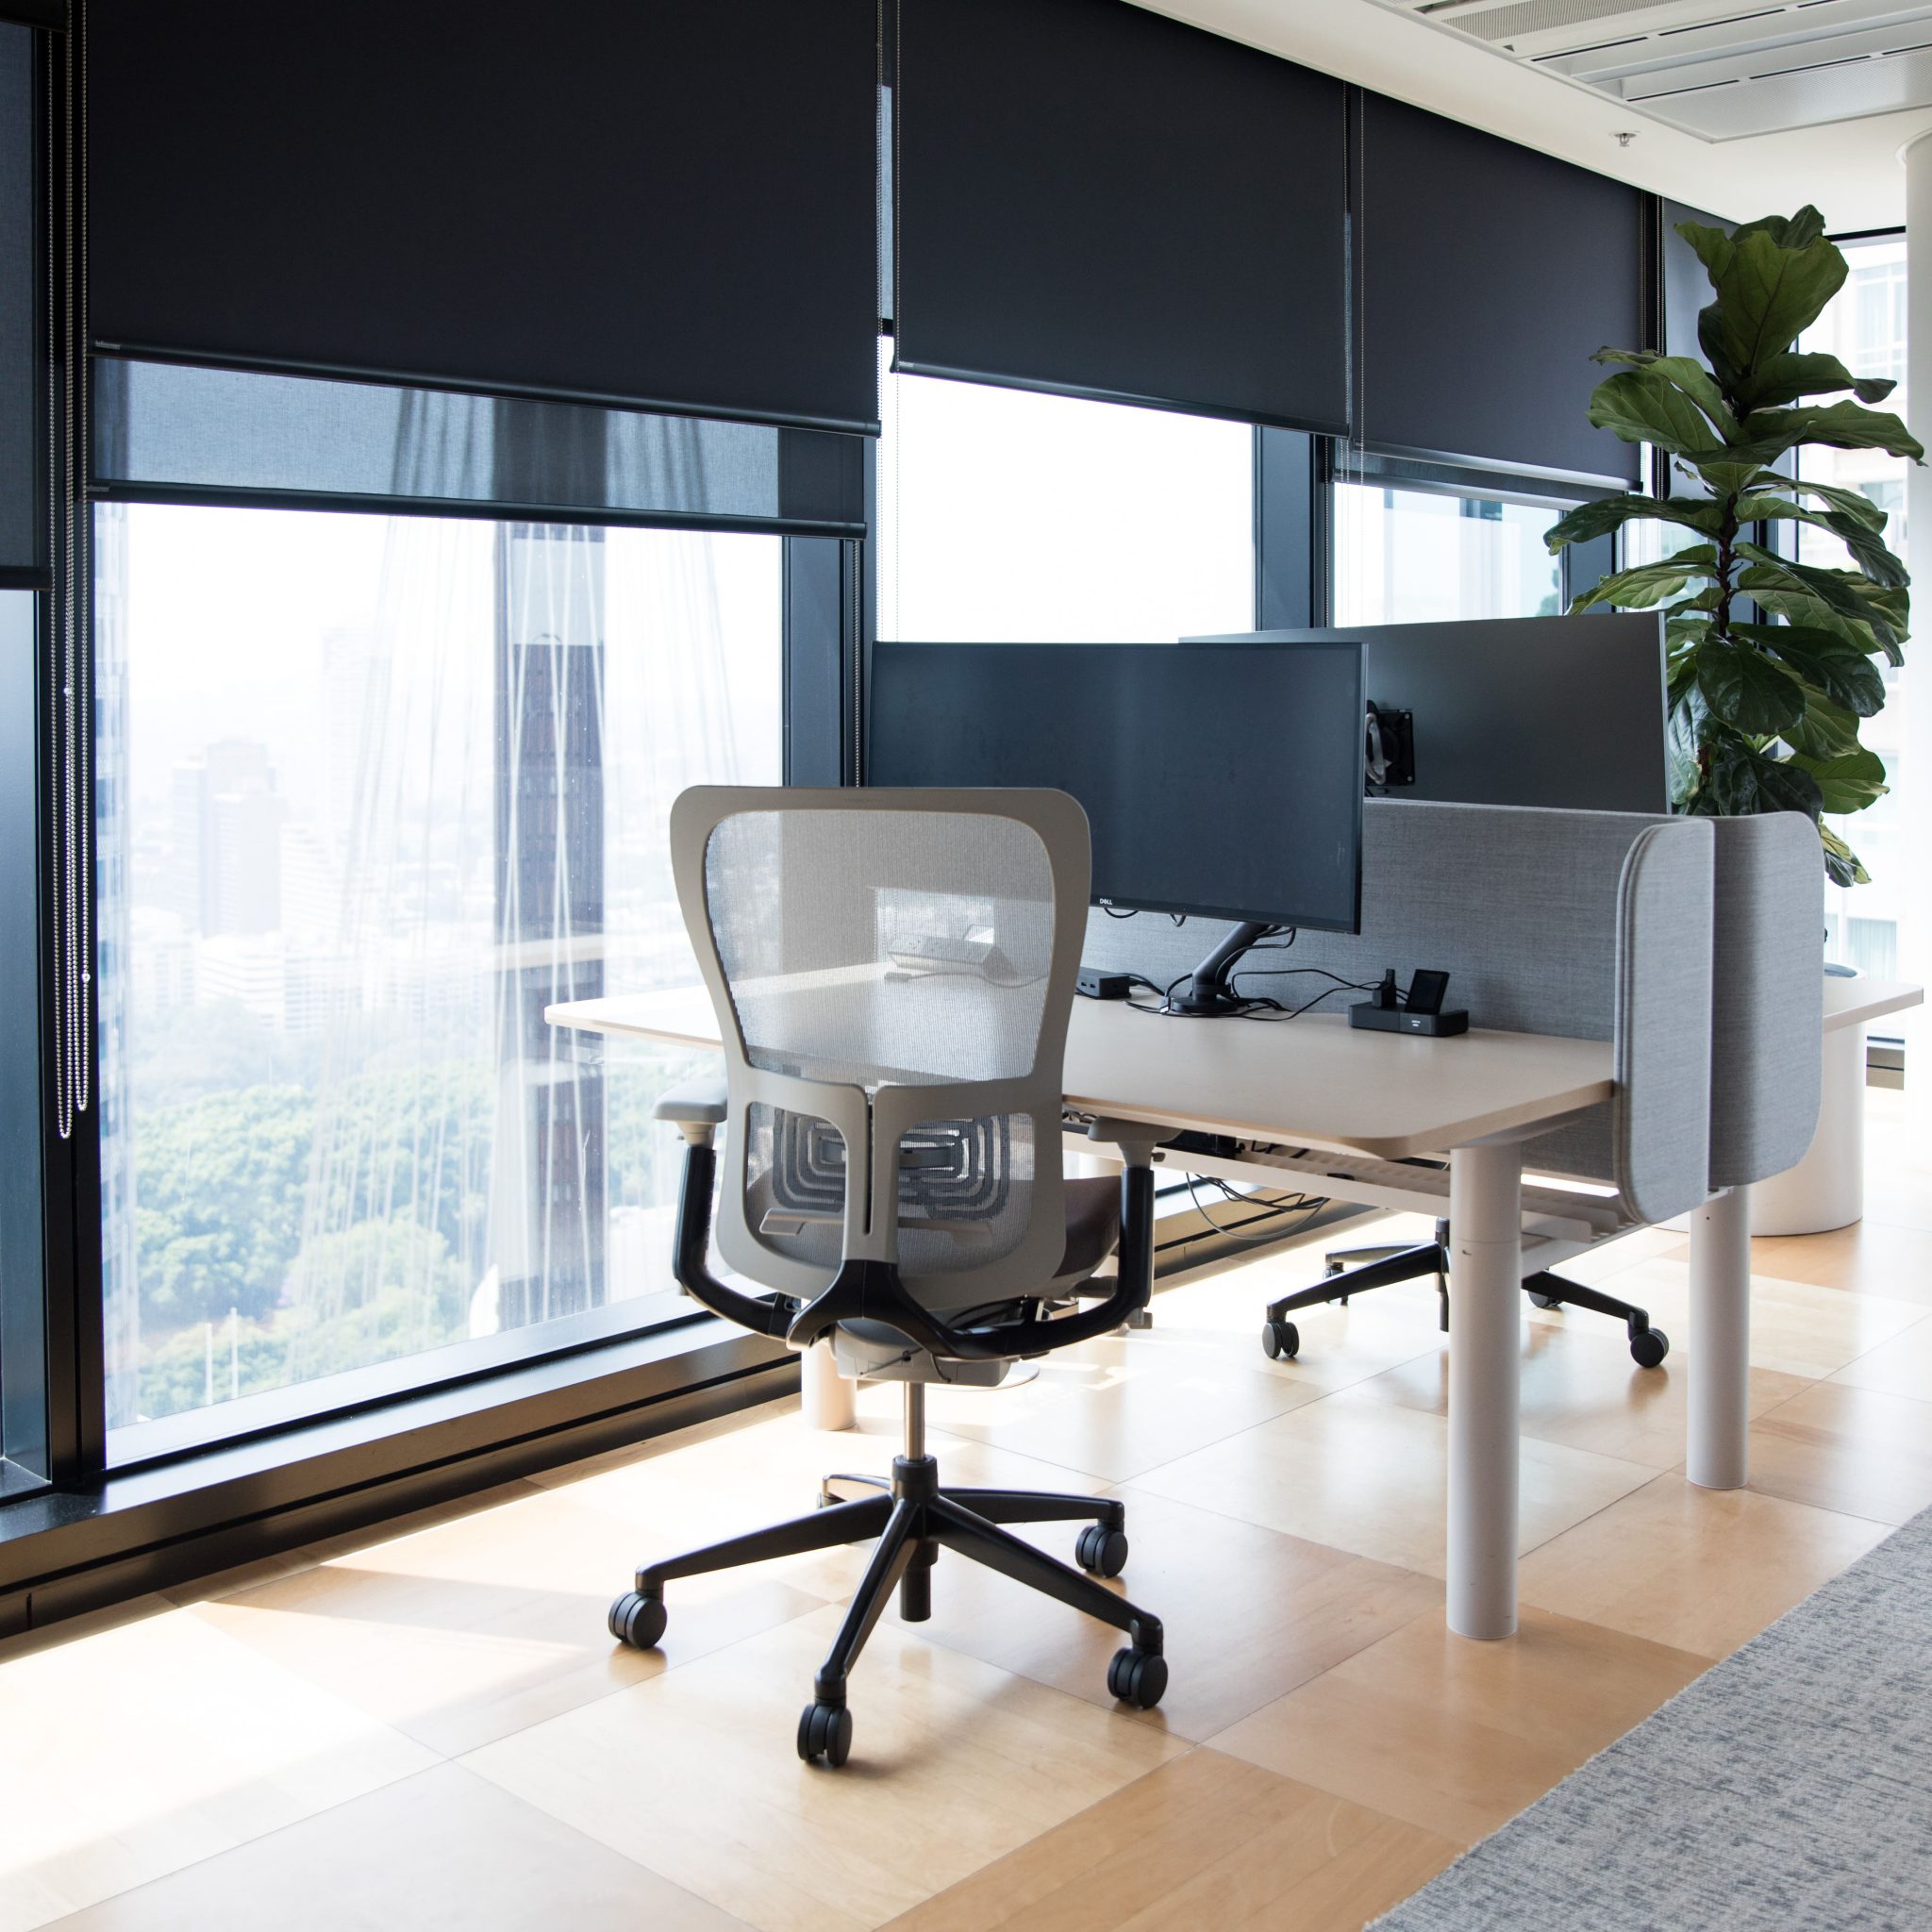 modern-office-fitout-interior-in-a-commercial-buil-GNJ6R8C